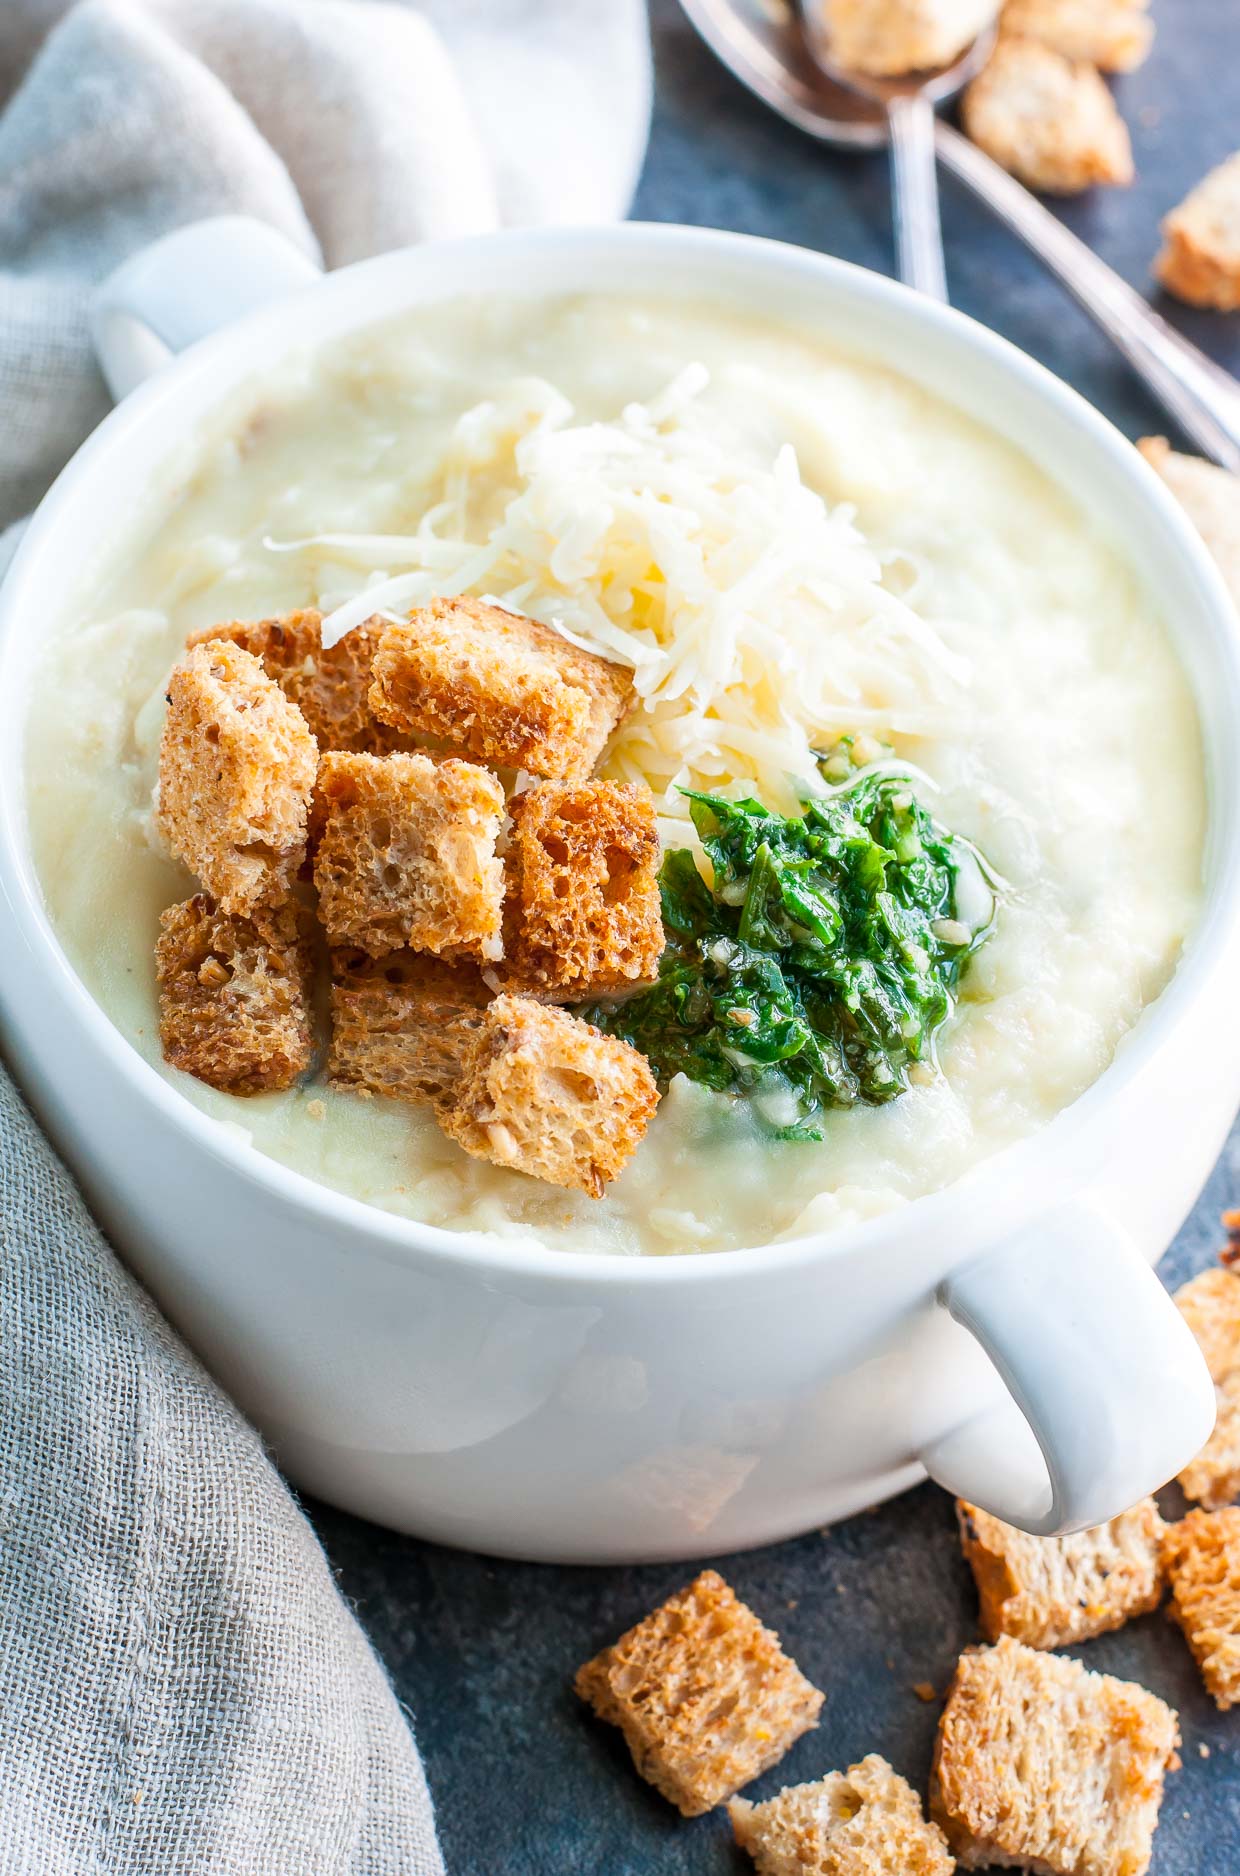 Creamy potato soup is the ultimate comfort food! This Cheesy Pesto Potato Soup is a lighter twist on the classic with all the bowl-licking flavor of the original! Instant Pot + Slow Cooker